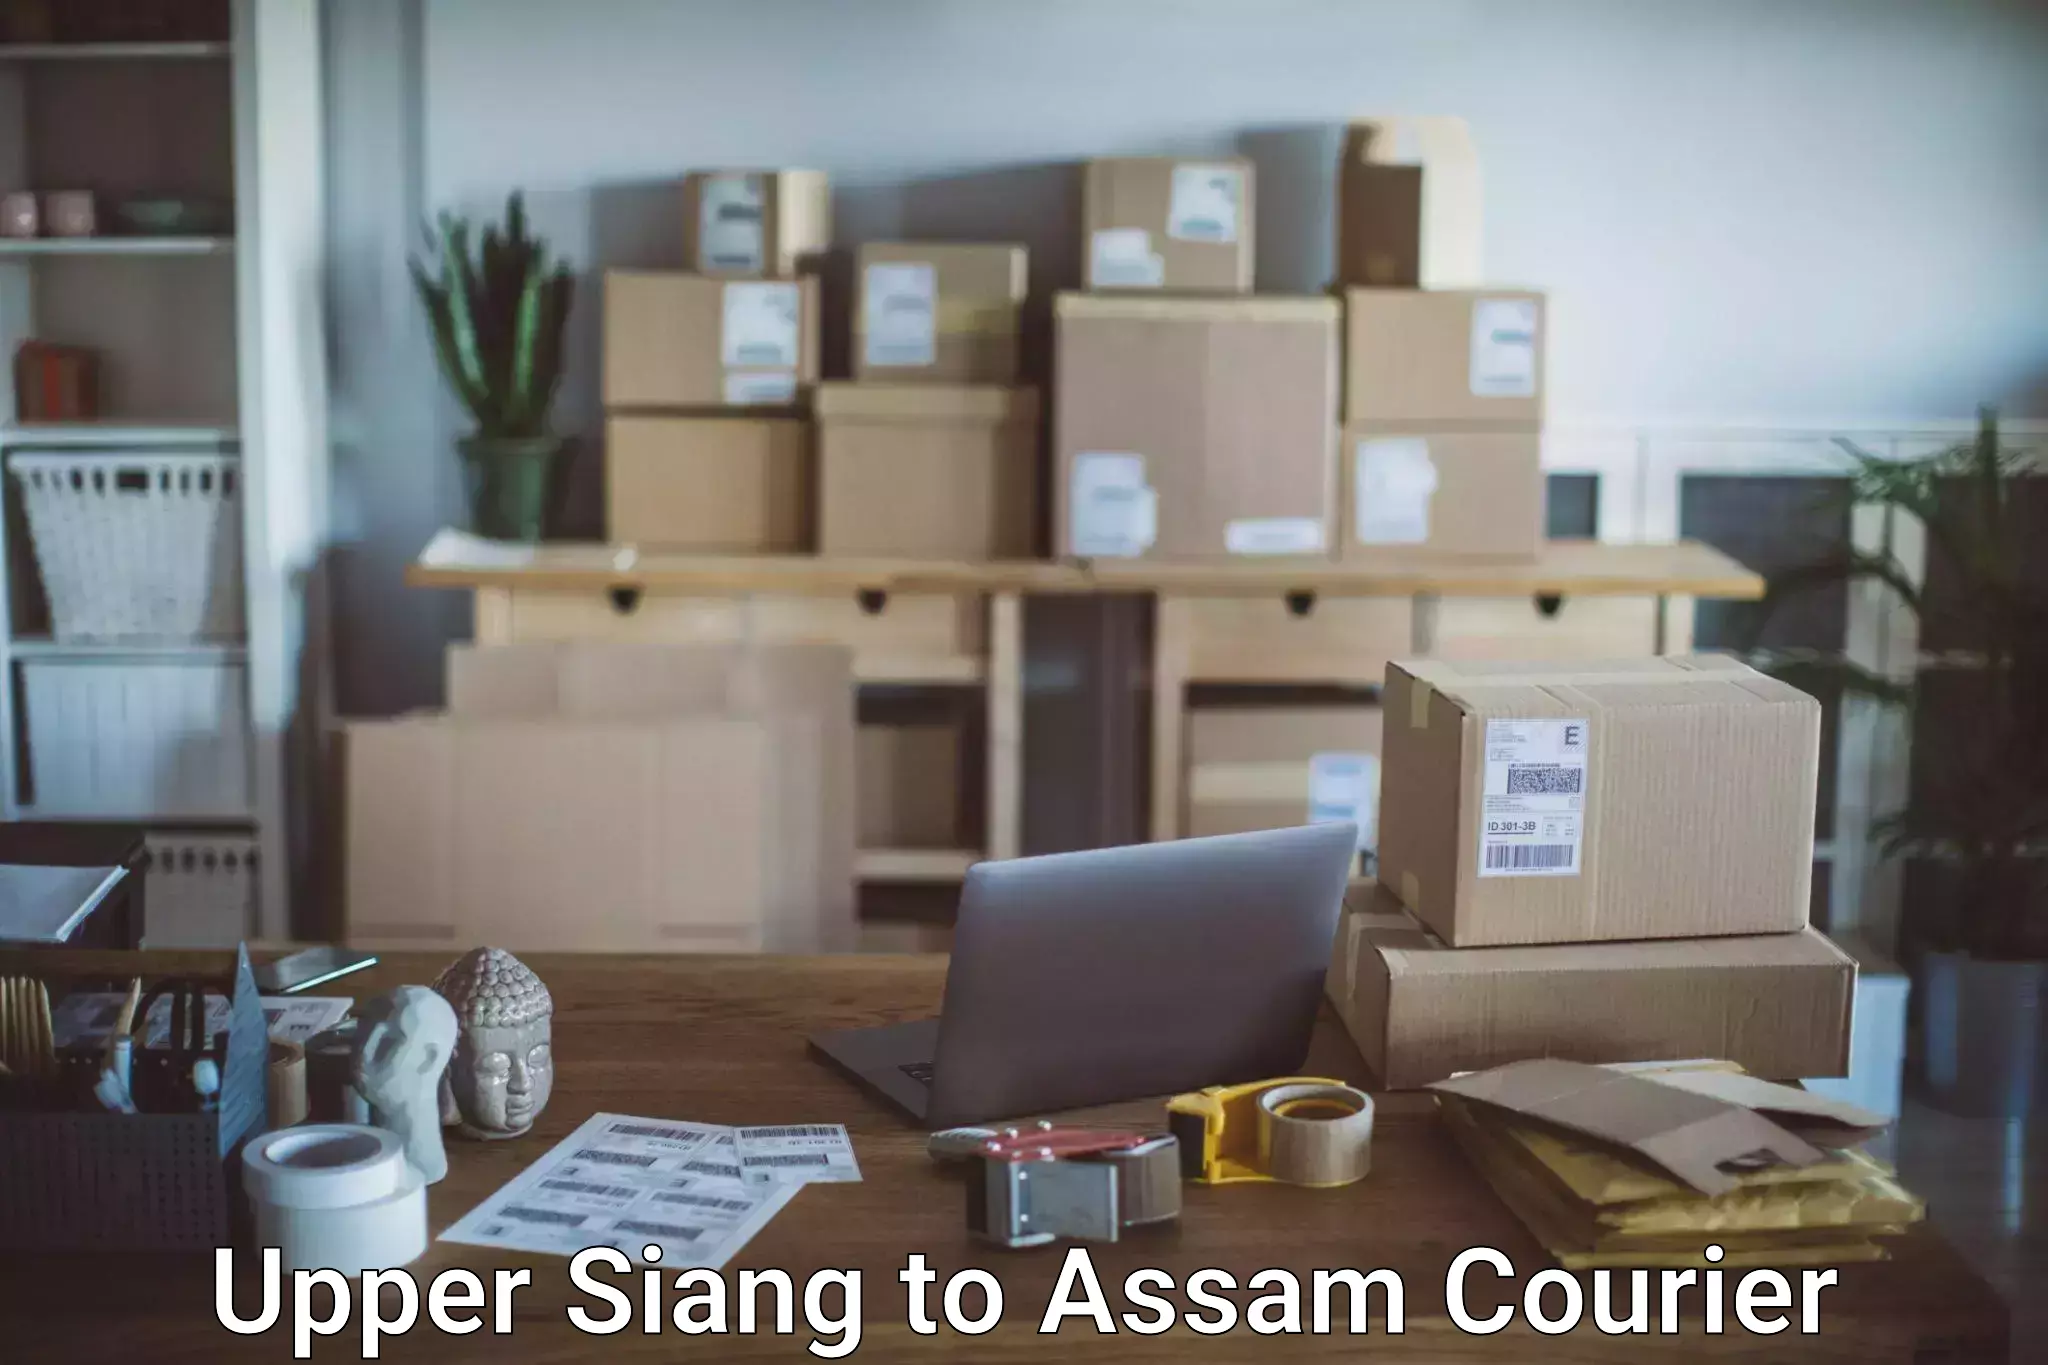 Urgent luggage shipment in Upper Siang to Majuli